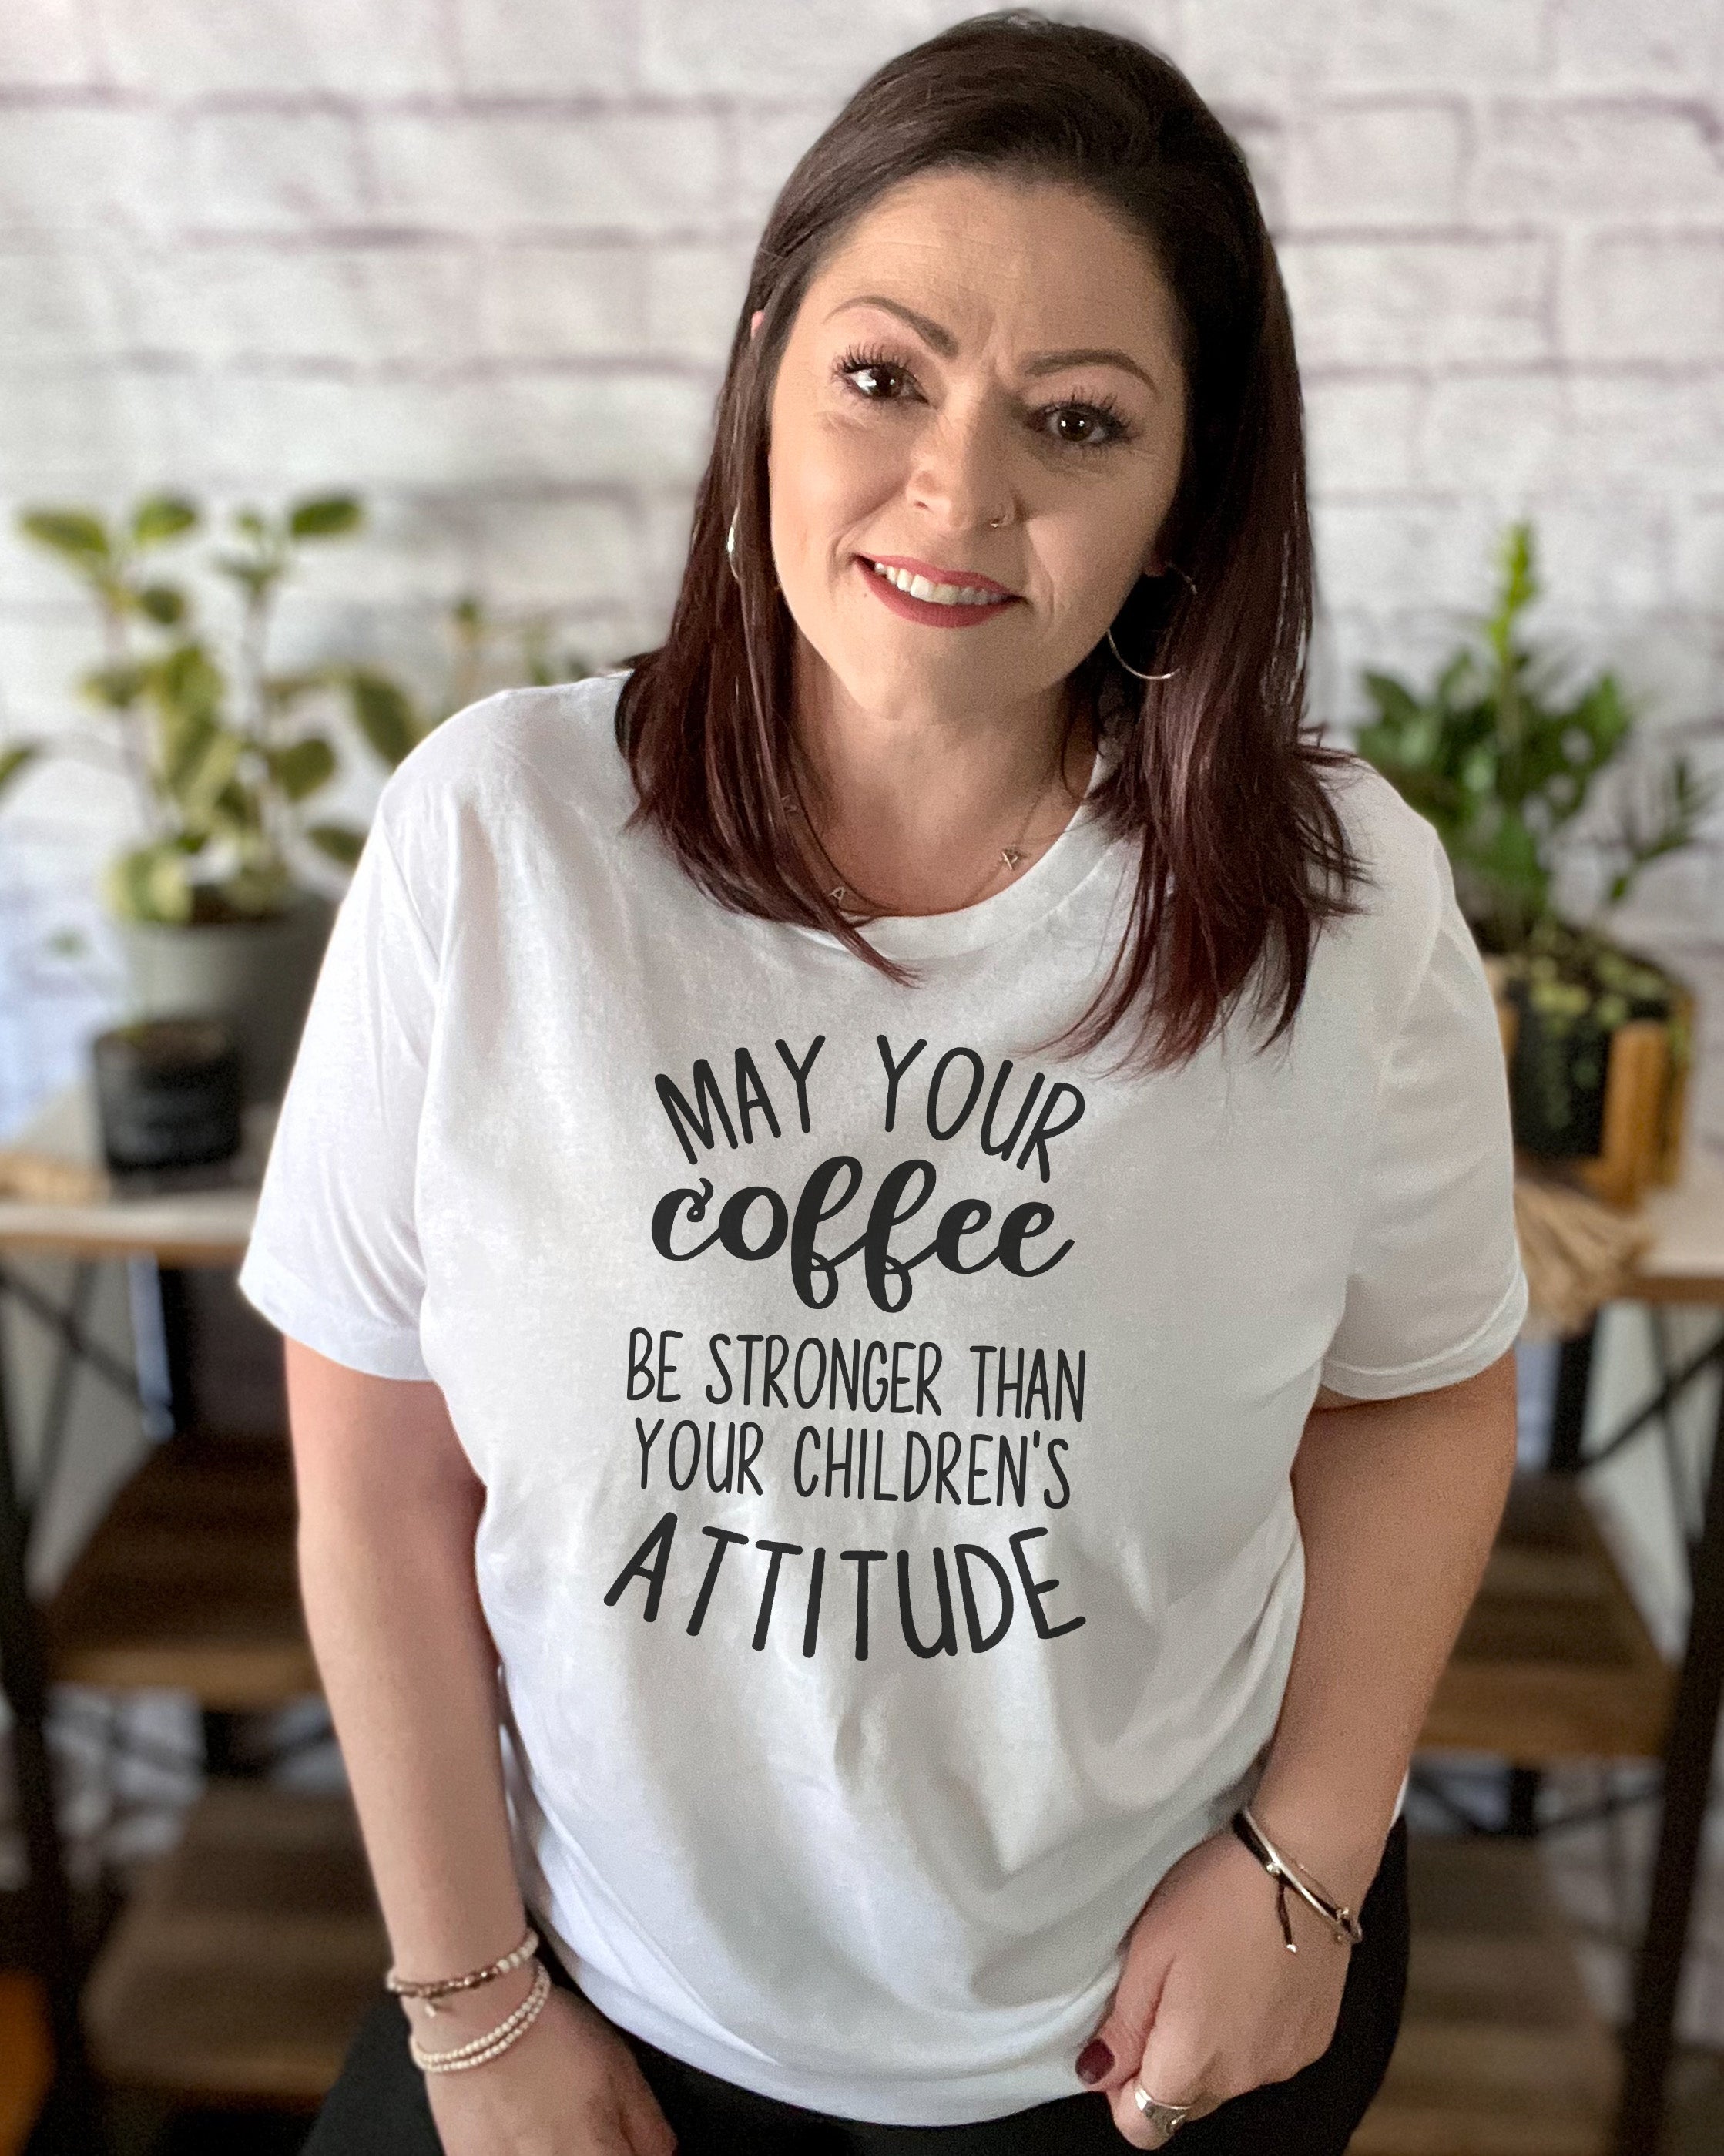 Samtykke Imagination Perforering May Your Coffee Be Stronger Than Your Children's Attitude – Rustic Cuts